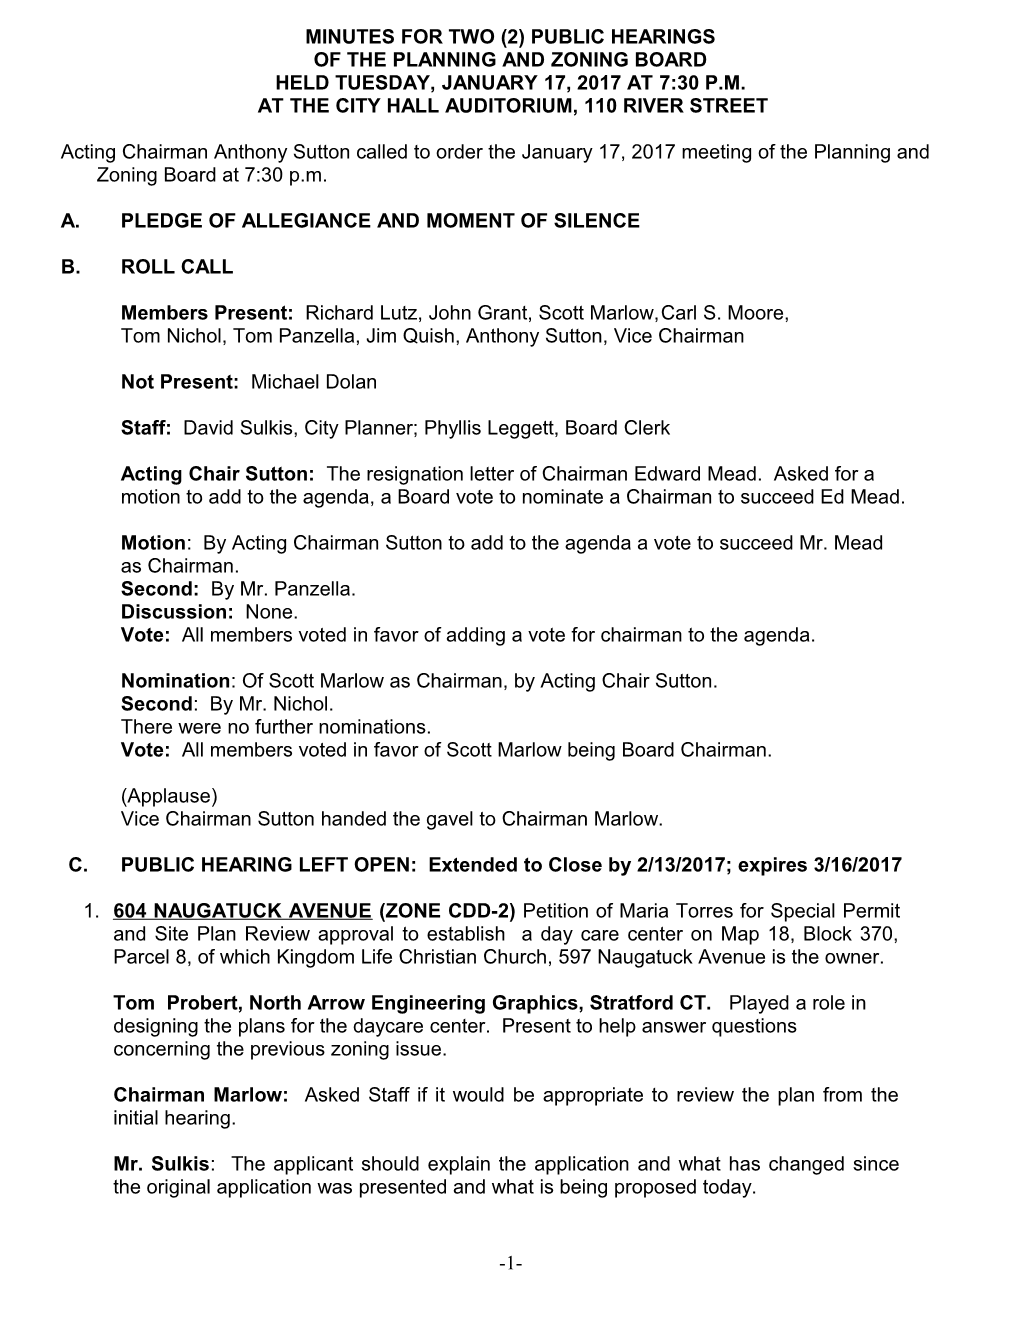 Minutes for Two (2) Public Hearings s3